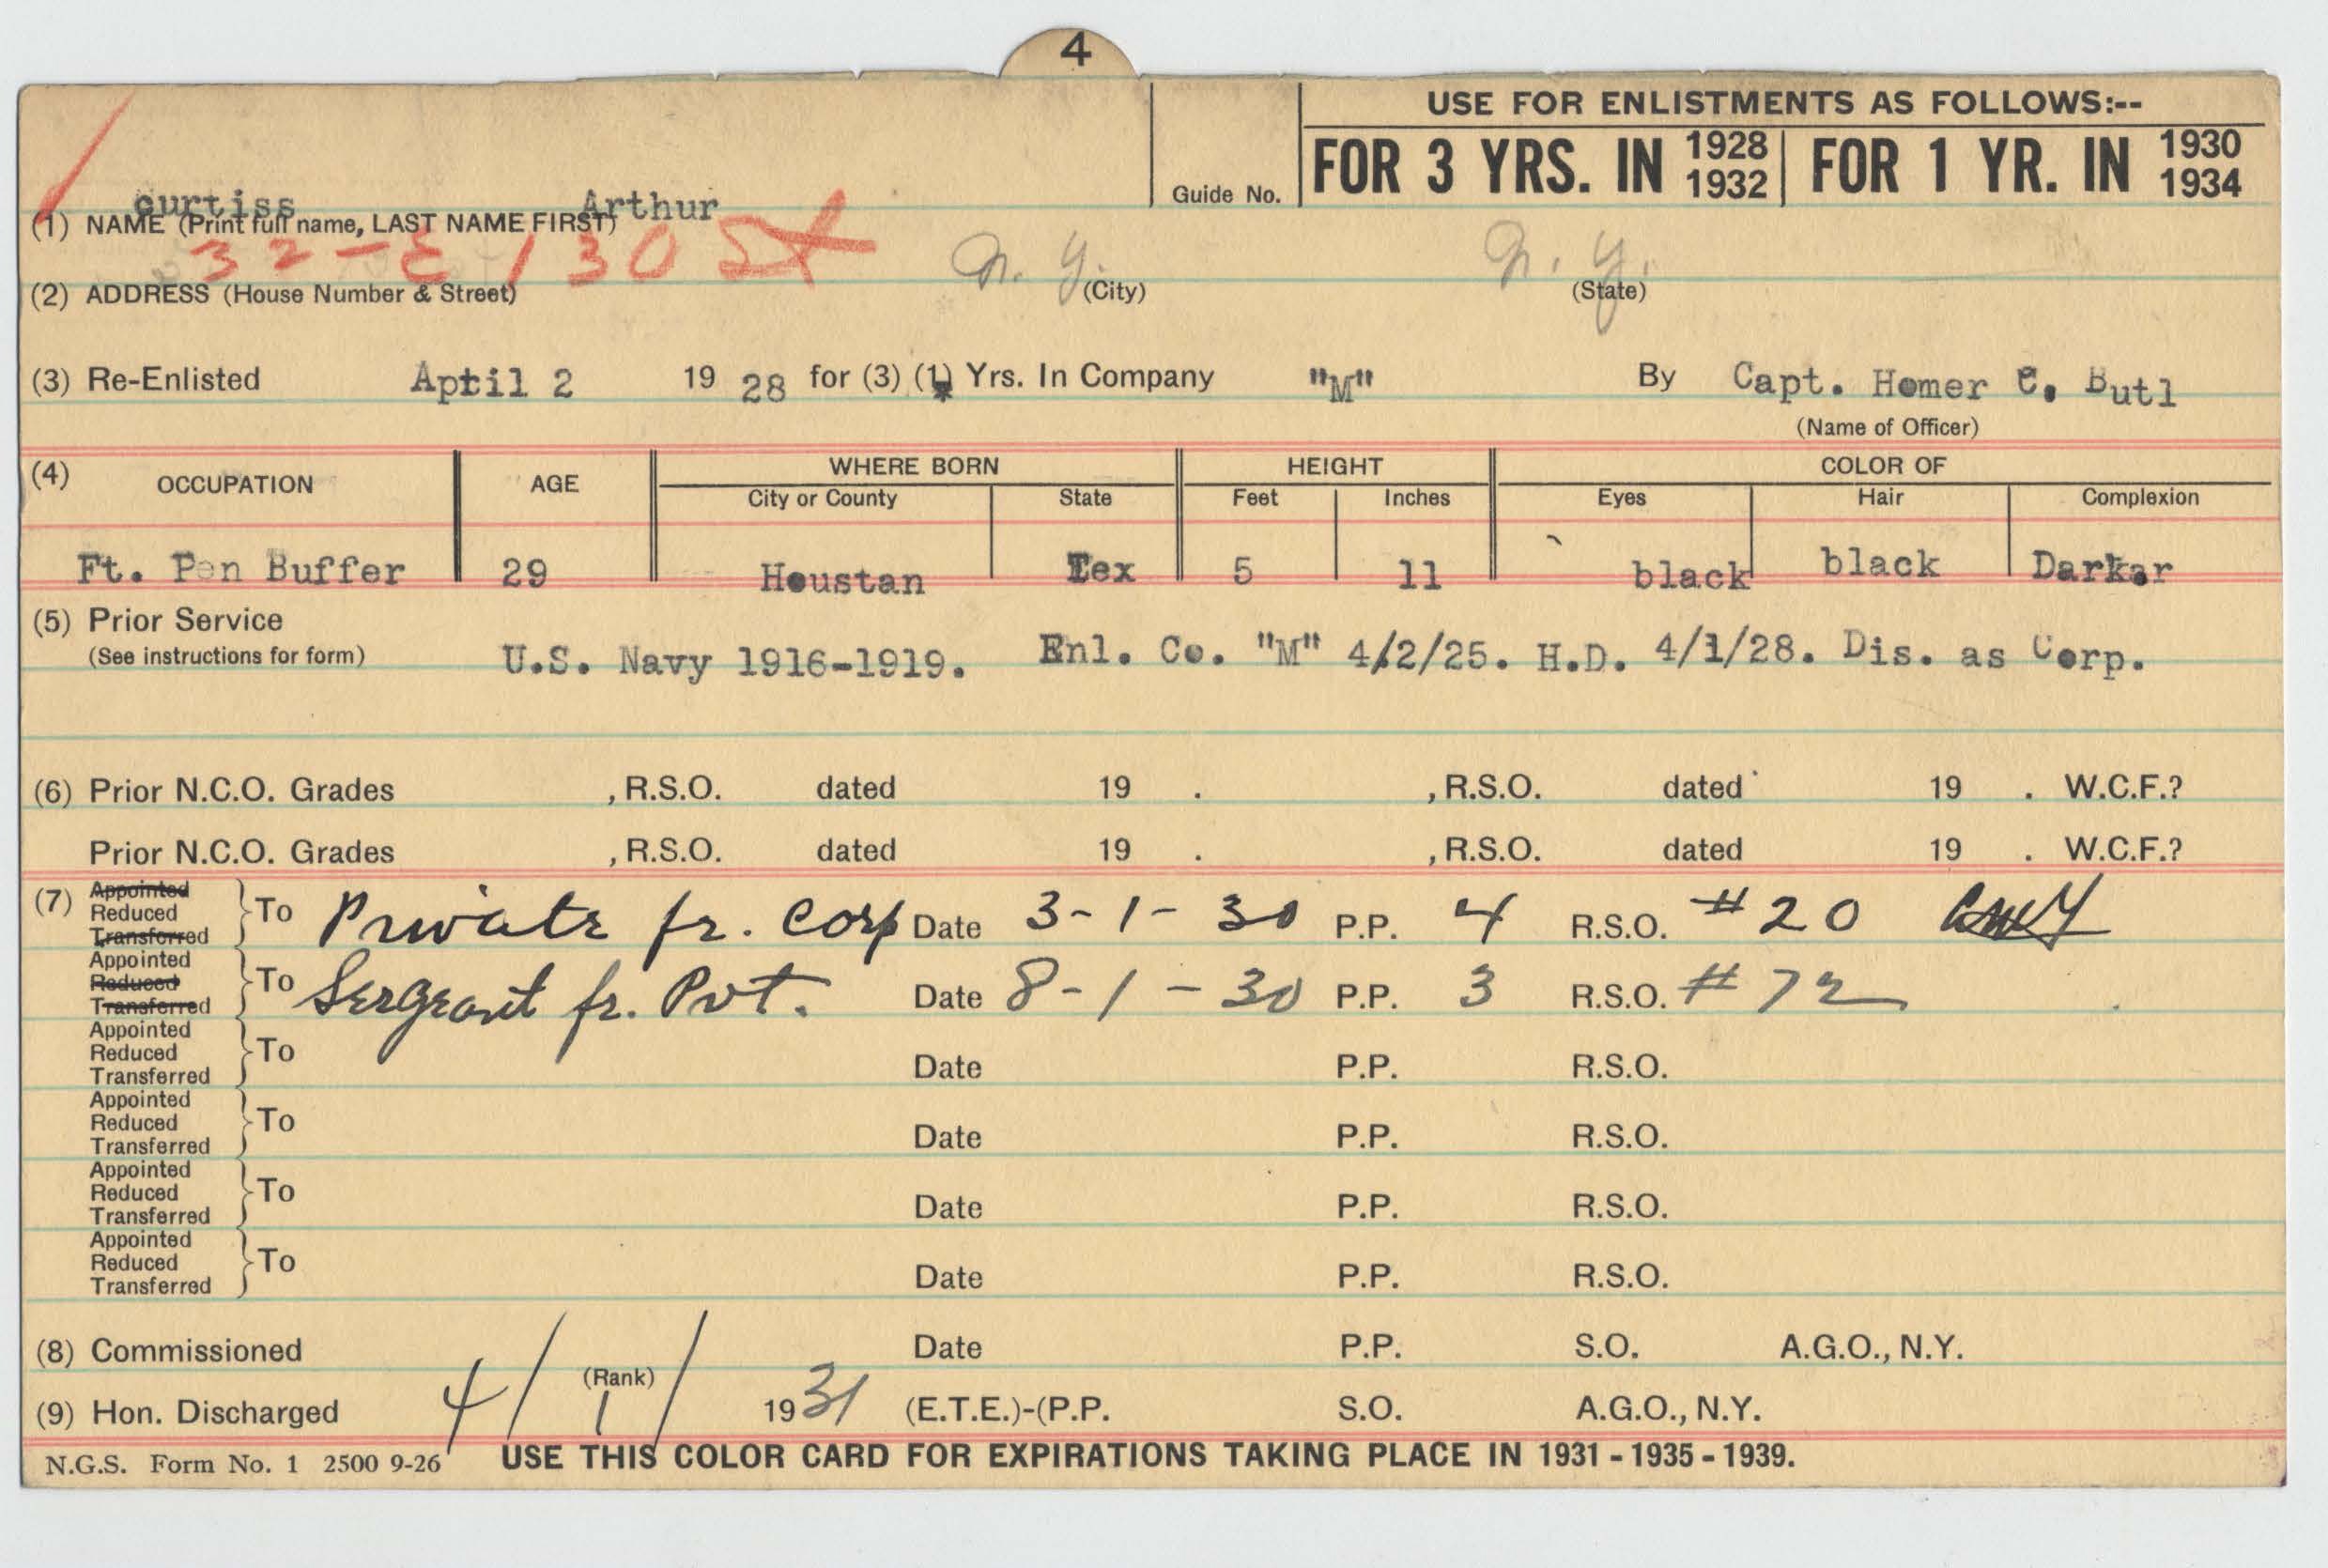 Harlem Hell Fighters Personnel Record Cards Can Now Be Found Online Article The United States Army